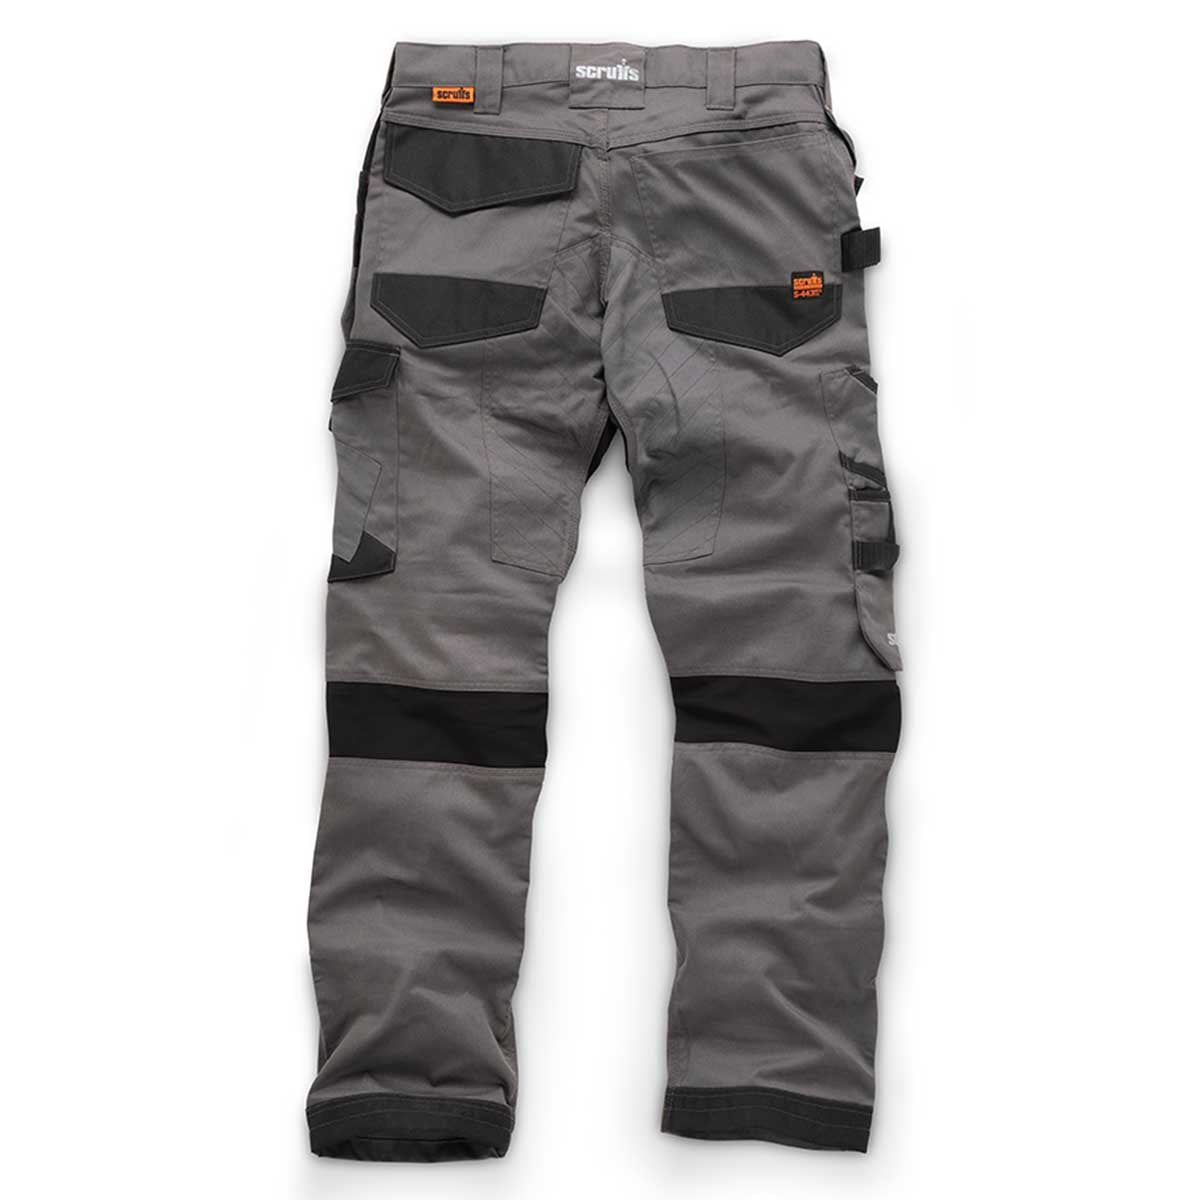 Scruffs Trade Holster Trousers Graphite 2